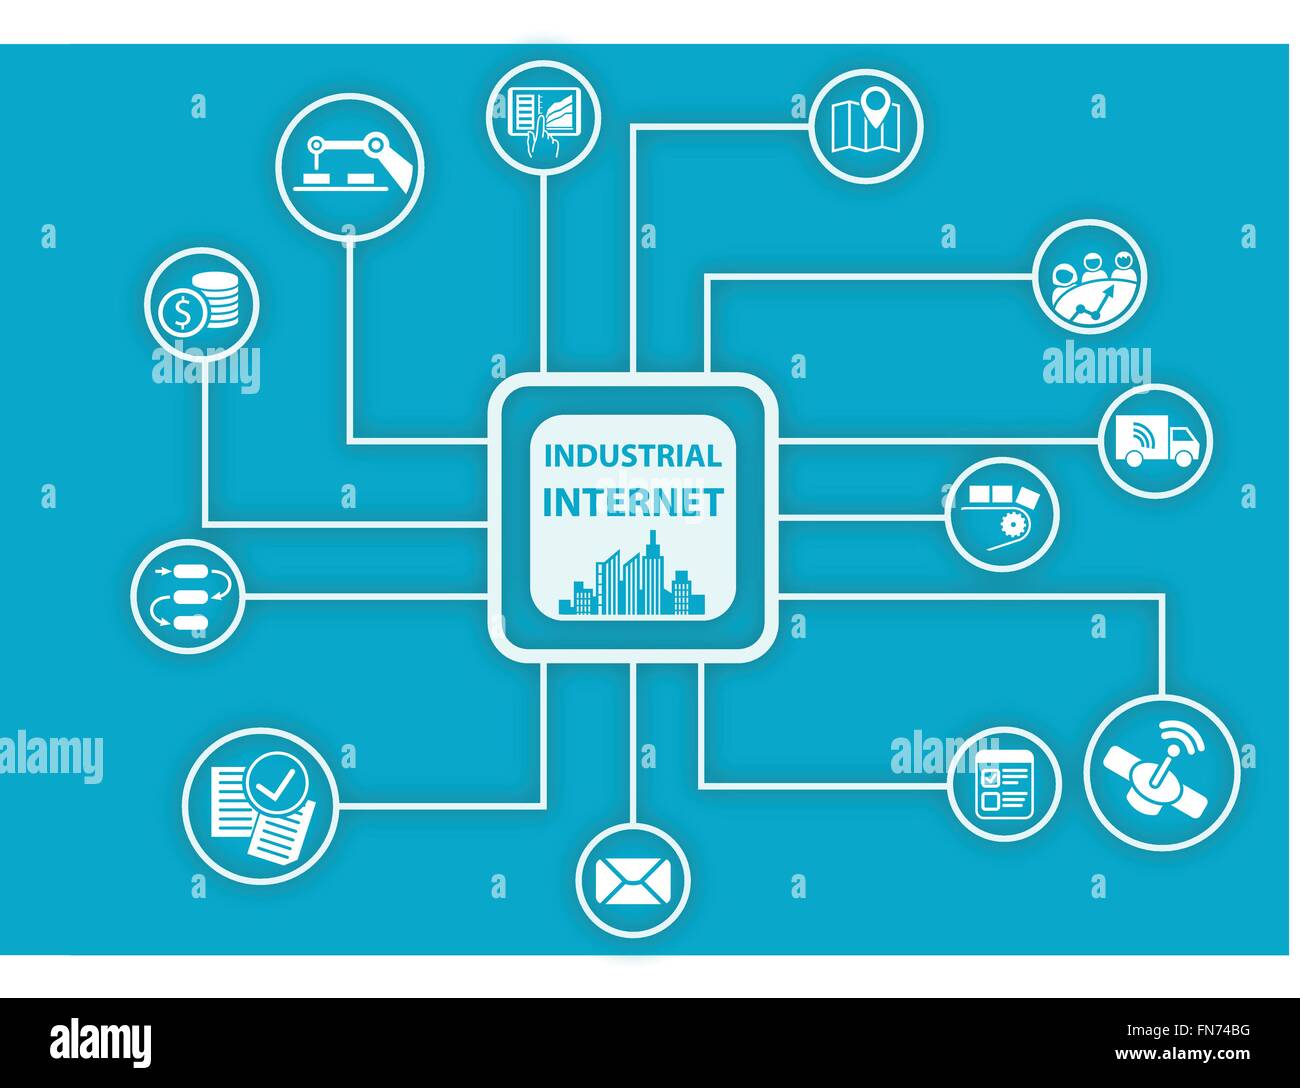 Industrial internet or industry 4.0 infographic. Vector illustration for connected devices using different symbols Stock Vector